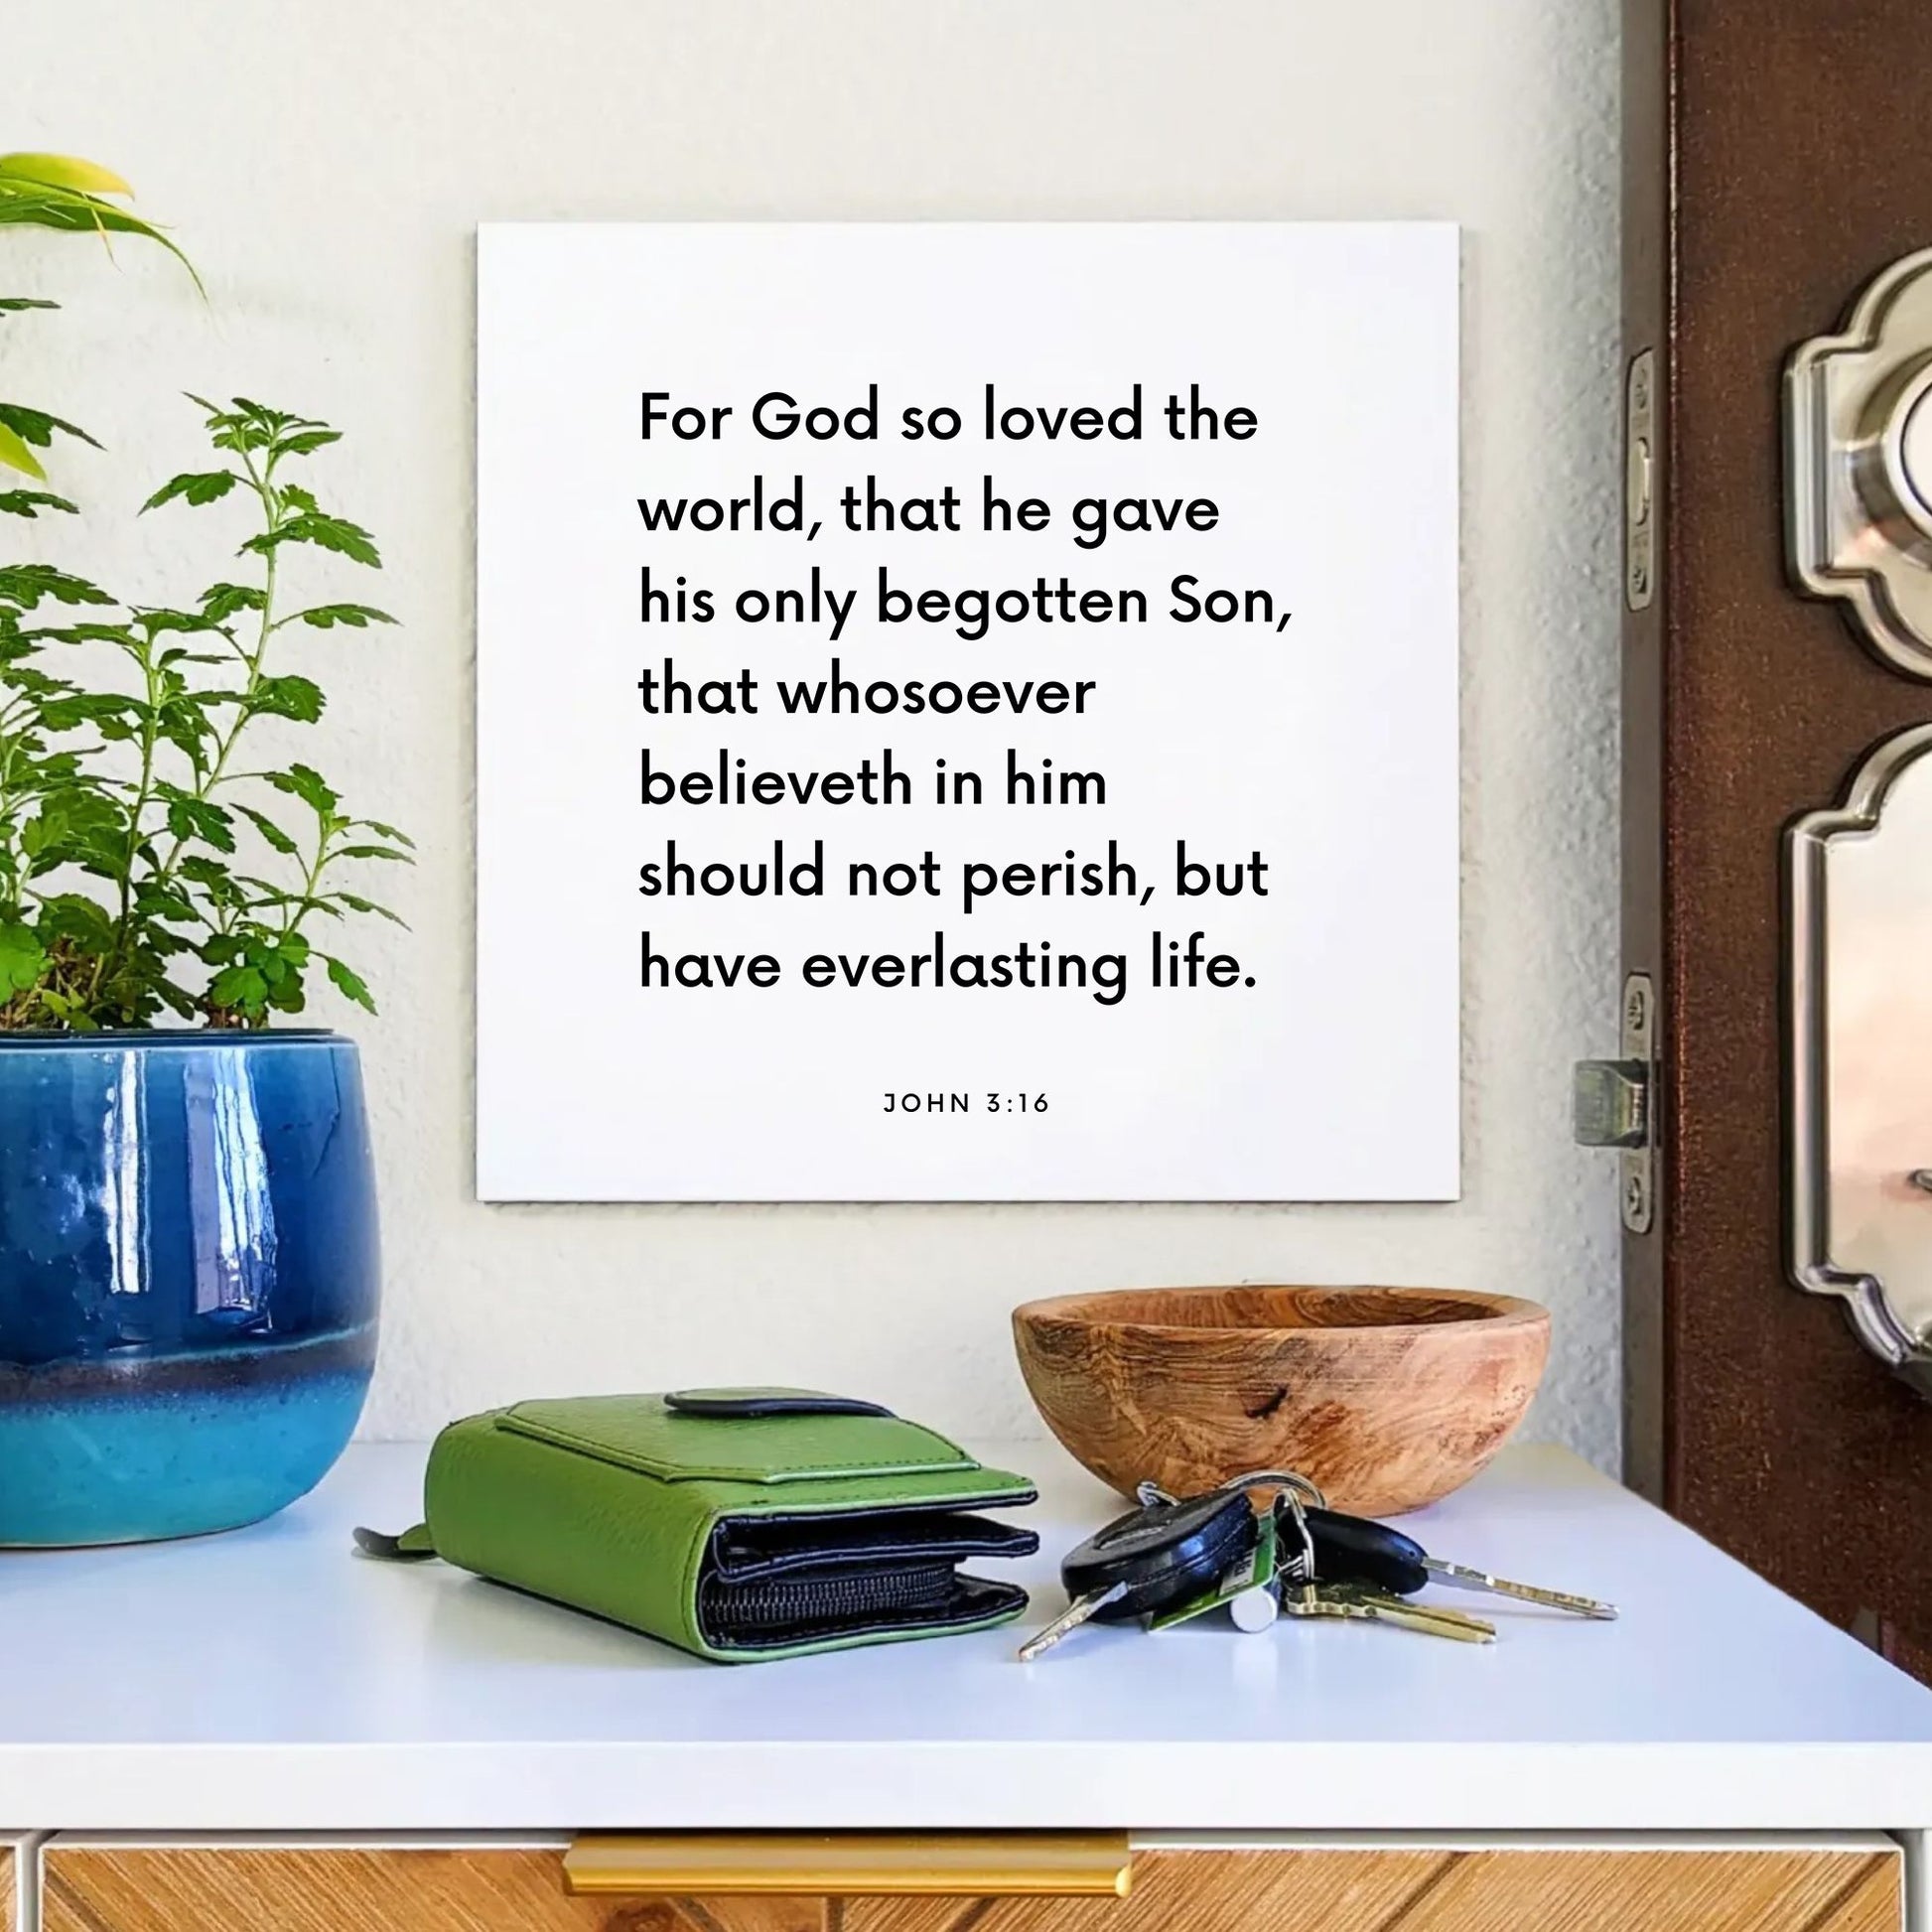 Entryway mouting of the scripture tile for John 3:16 - "For God so loved the world"